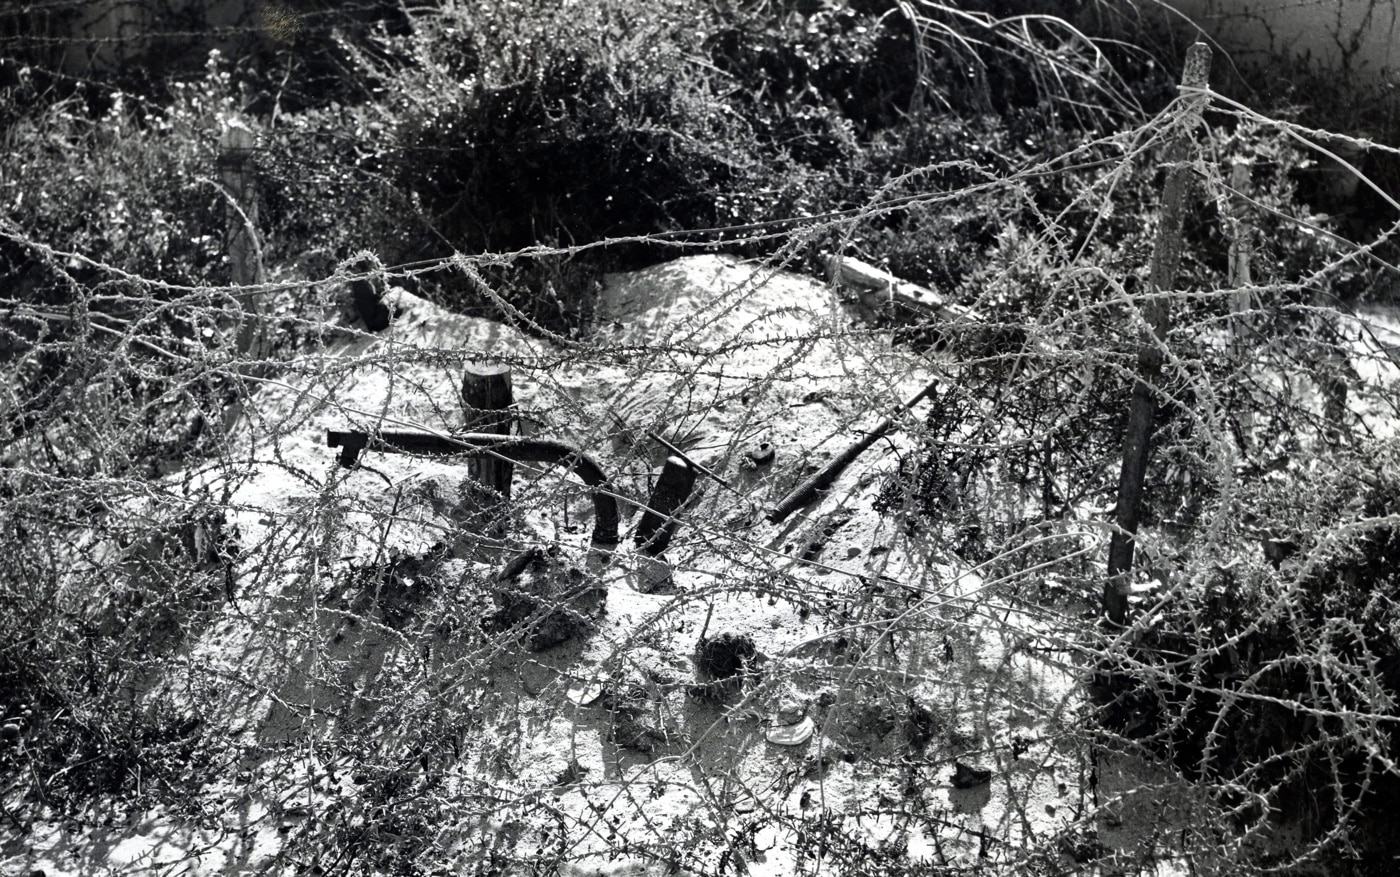 Here we see barbed wire protecting a German flamethrower trap near a bunker at Fort de Foucarville.